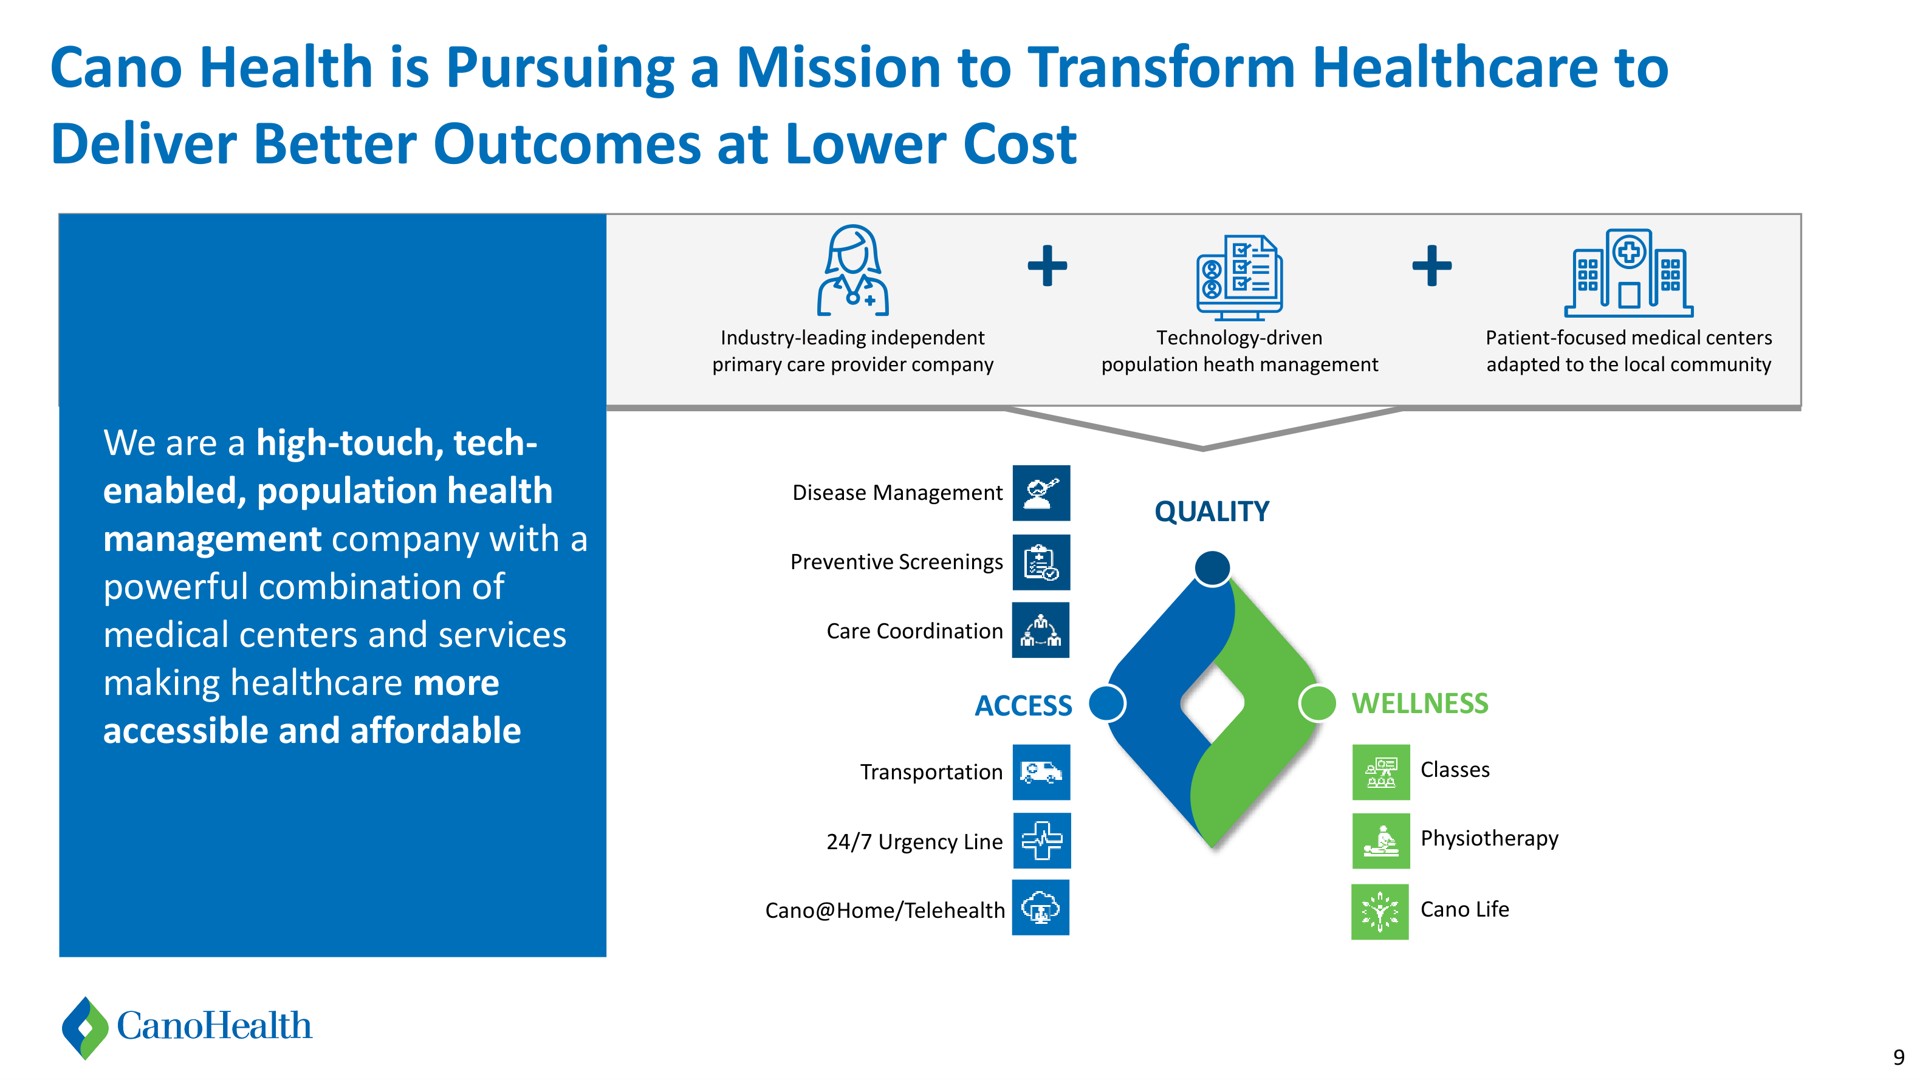 health is pursuing a mission to transform to deliver better outcomes at lower cost | Cano Health